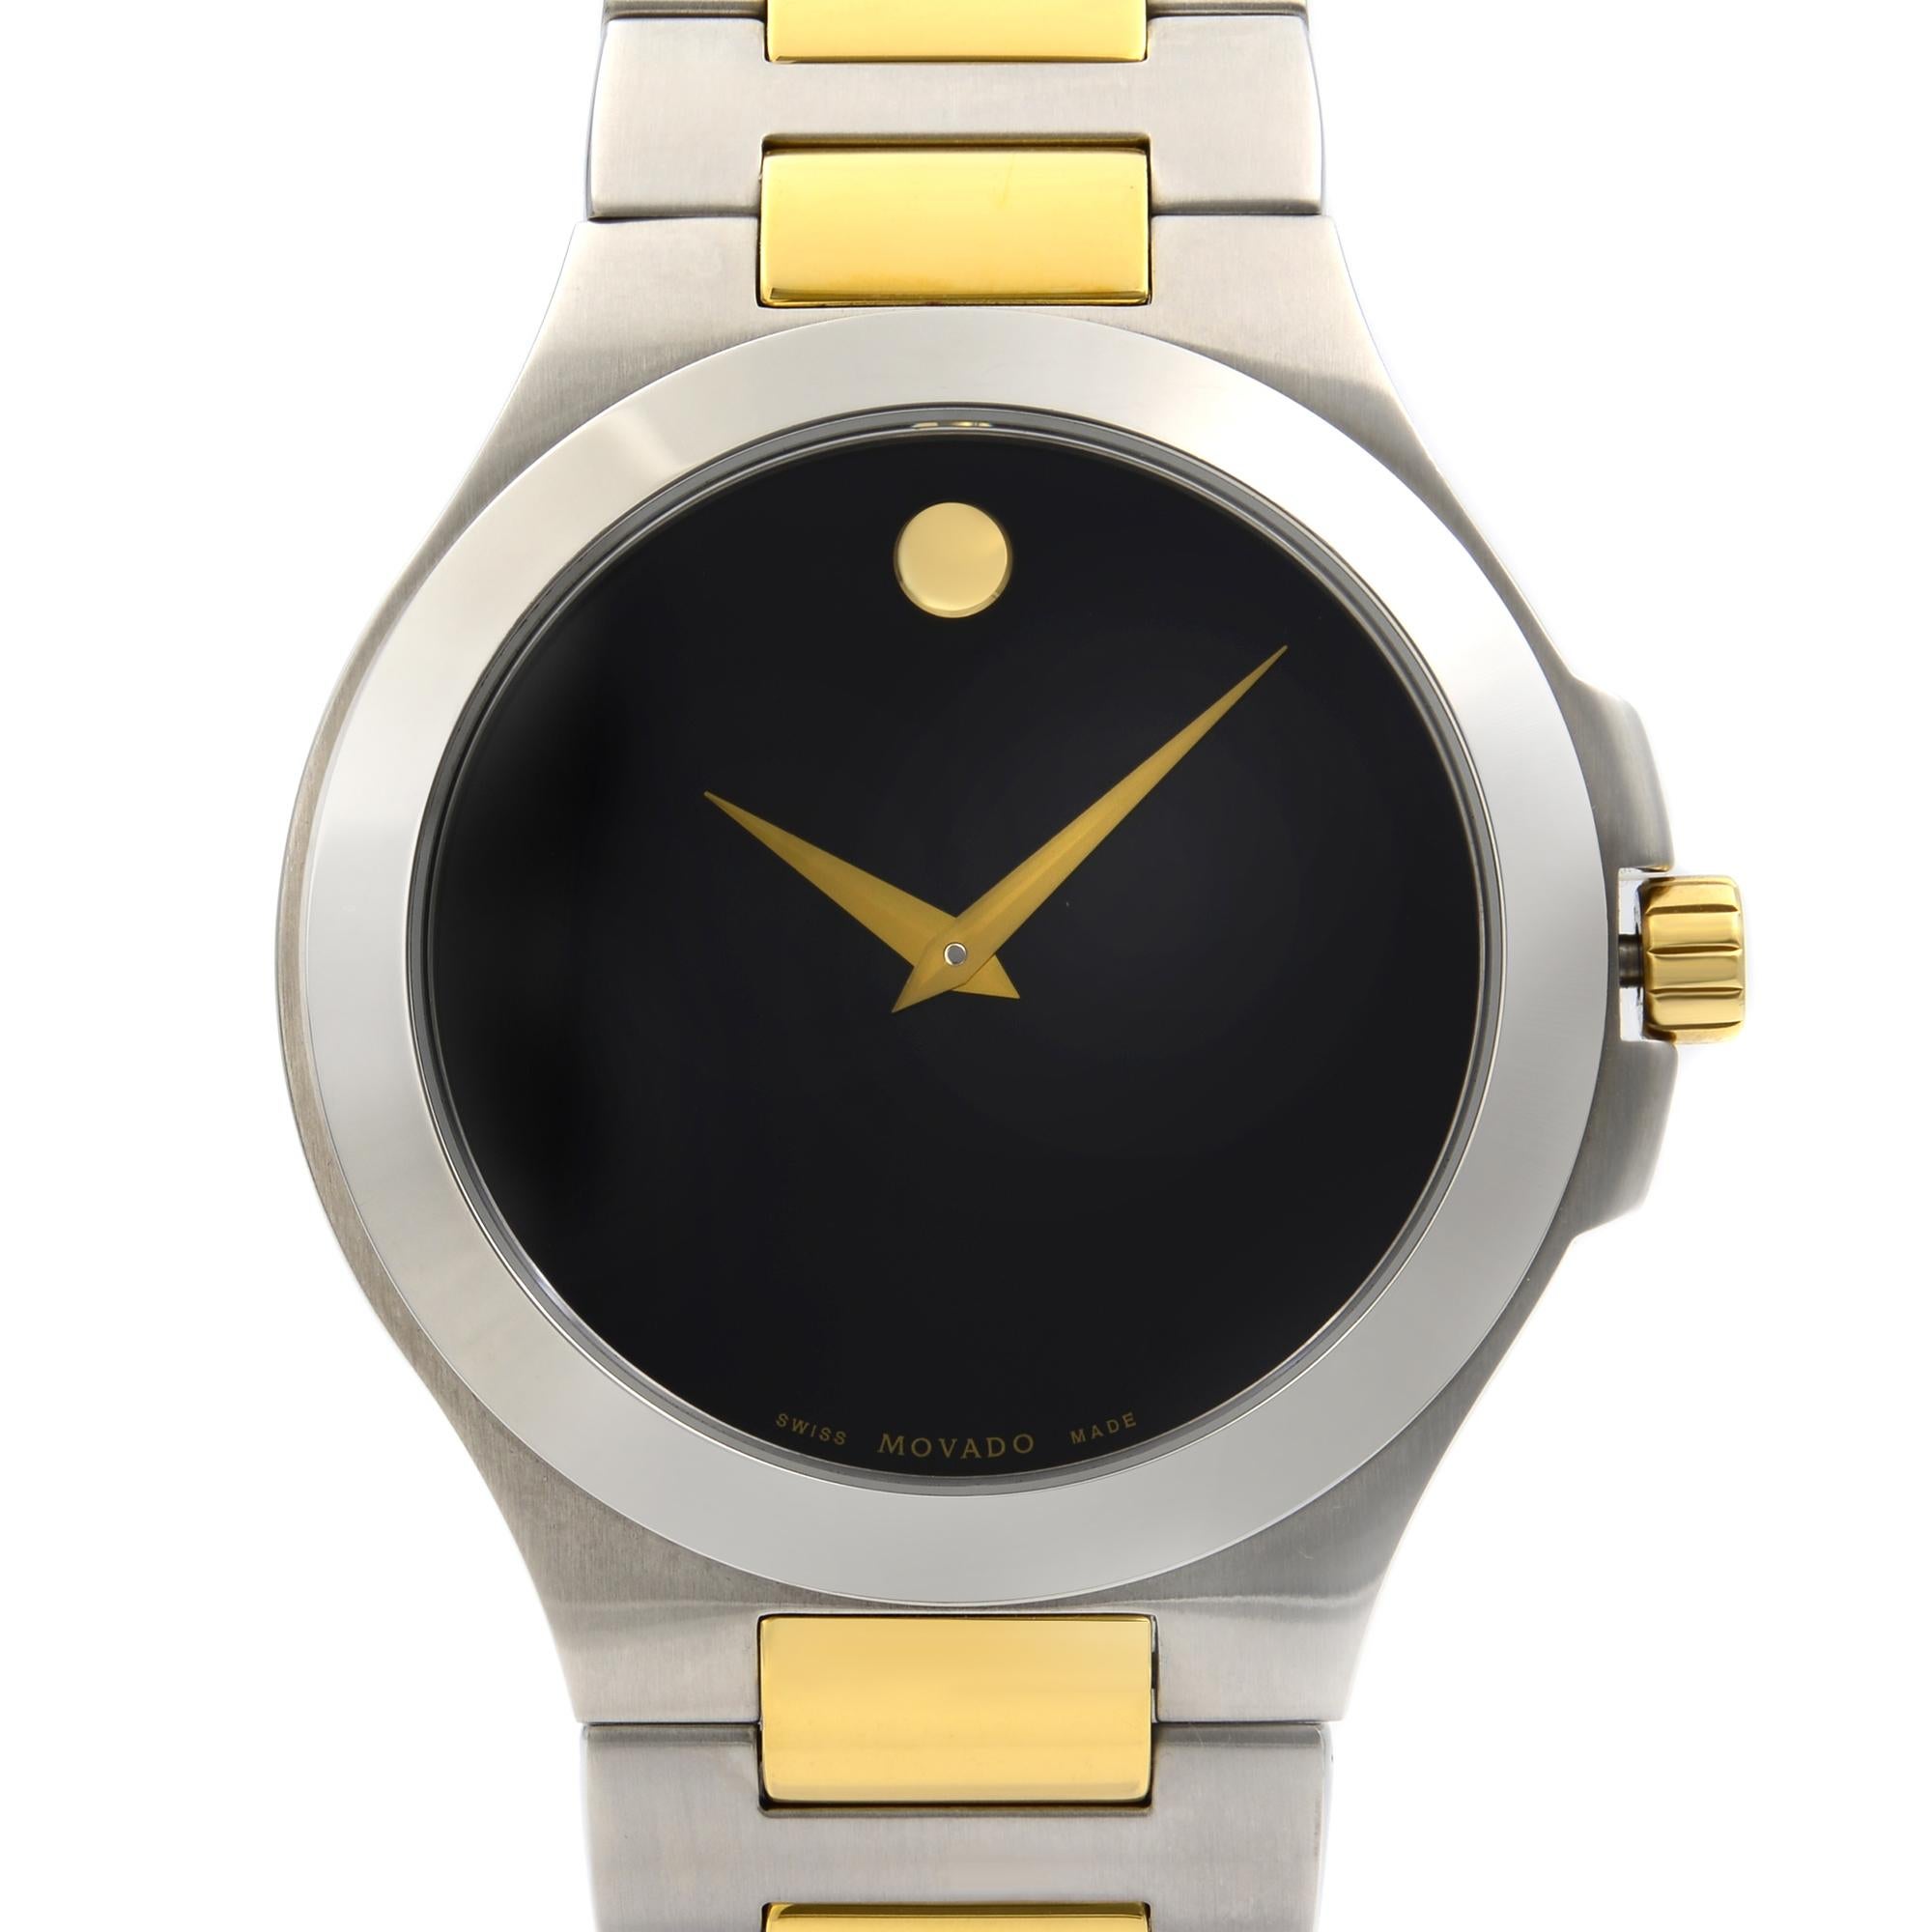 This watch is in display model but has a few hairline scratches on a gold tone link visible only under direct light and from certain angles. Comes with manufacturers box and papers. Backed by a 3 year warranty. 
Details: Dress/Formal/ Band Color